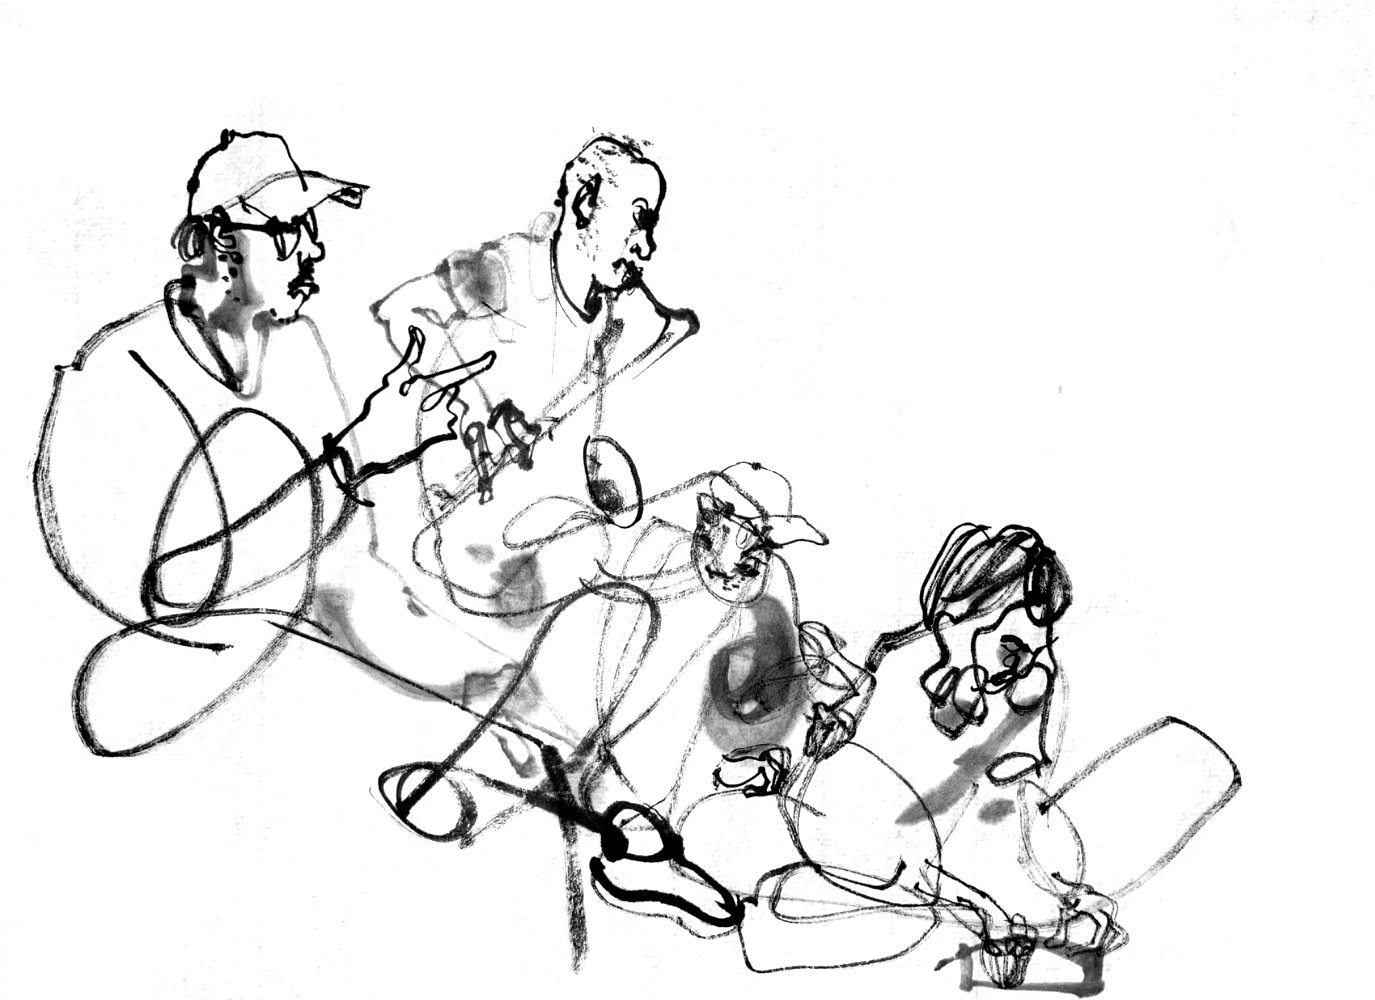 Ink drawing of four musicians.